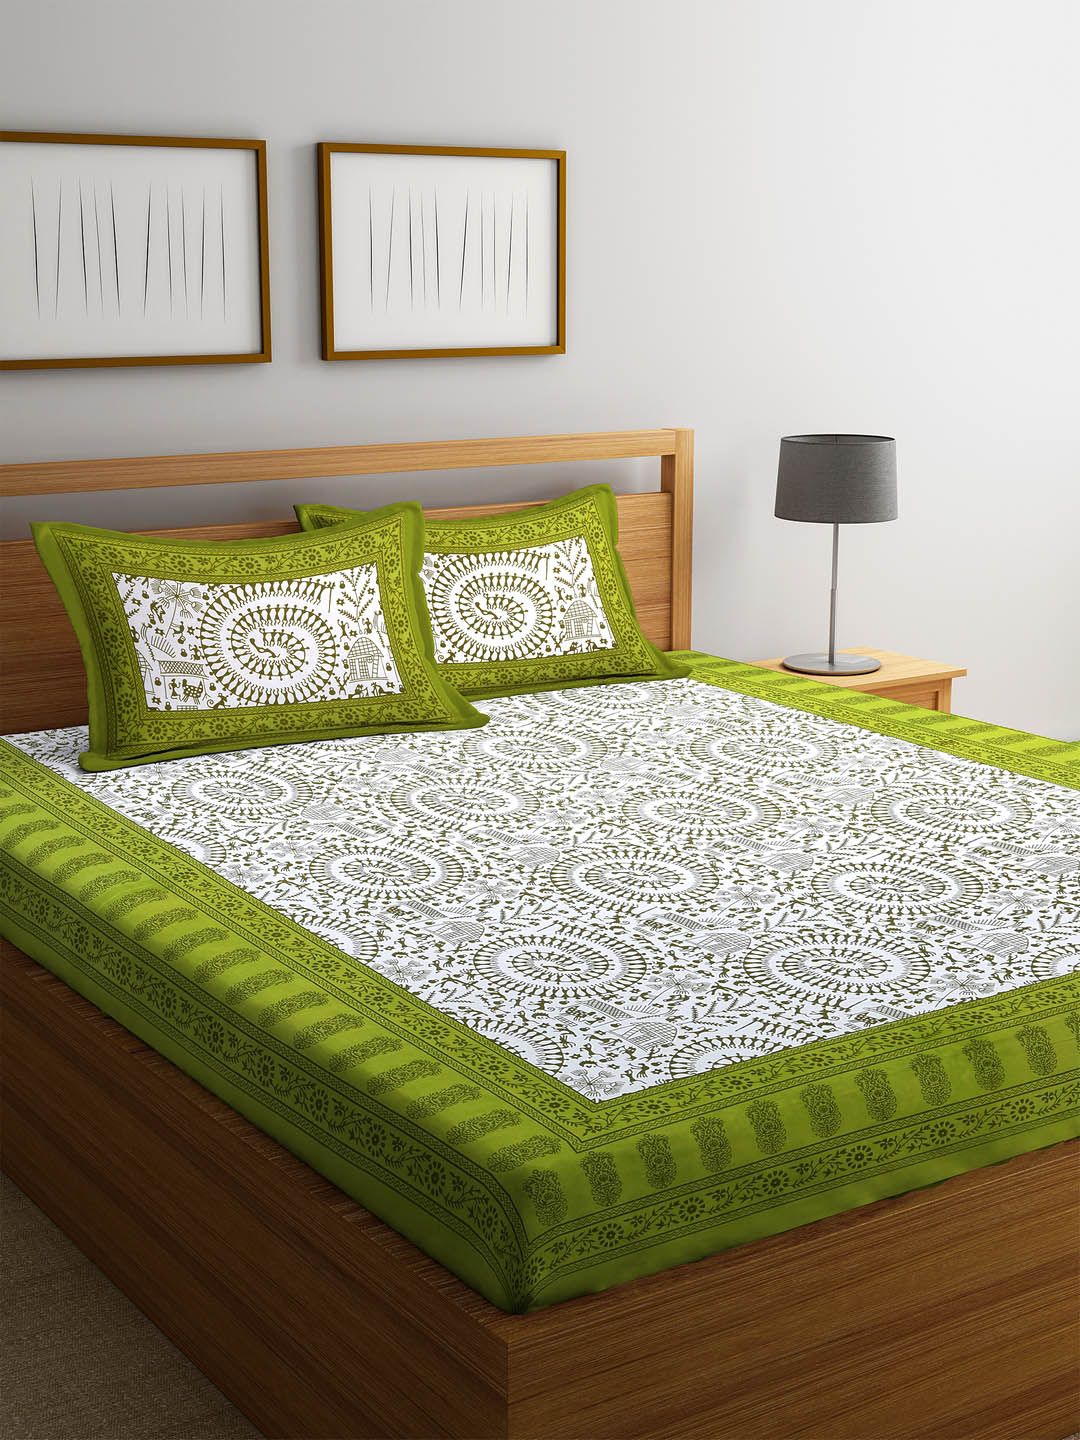 Rajasthan Decor Green Printed Flat 144 TC Cotton Double Bedsheet with Pillow Covers Price in India